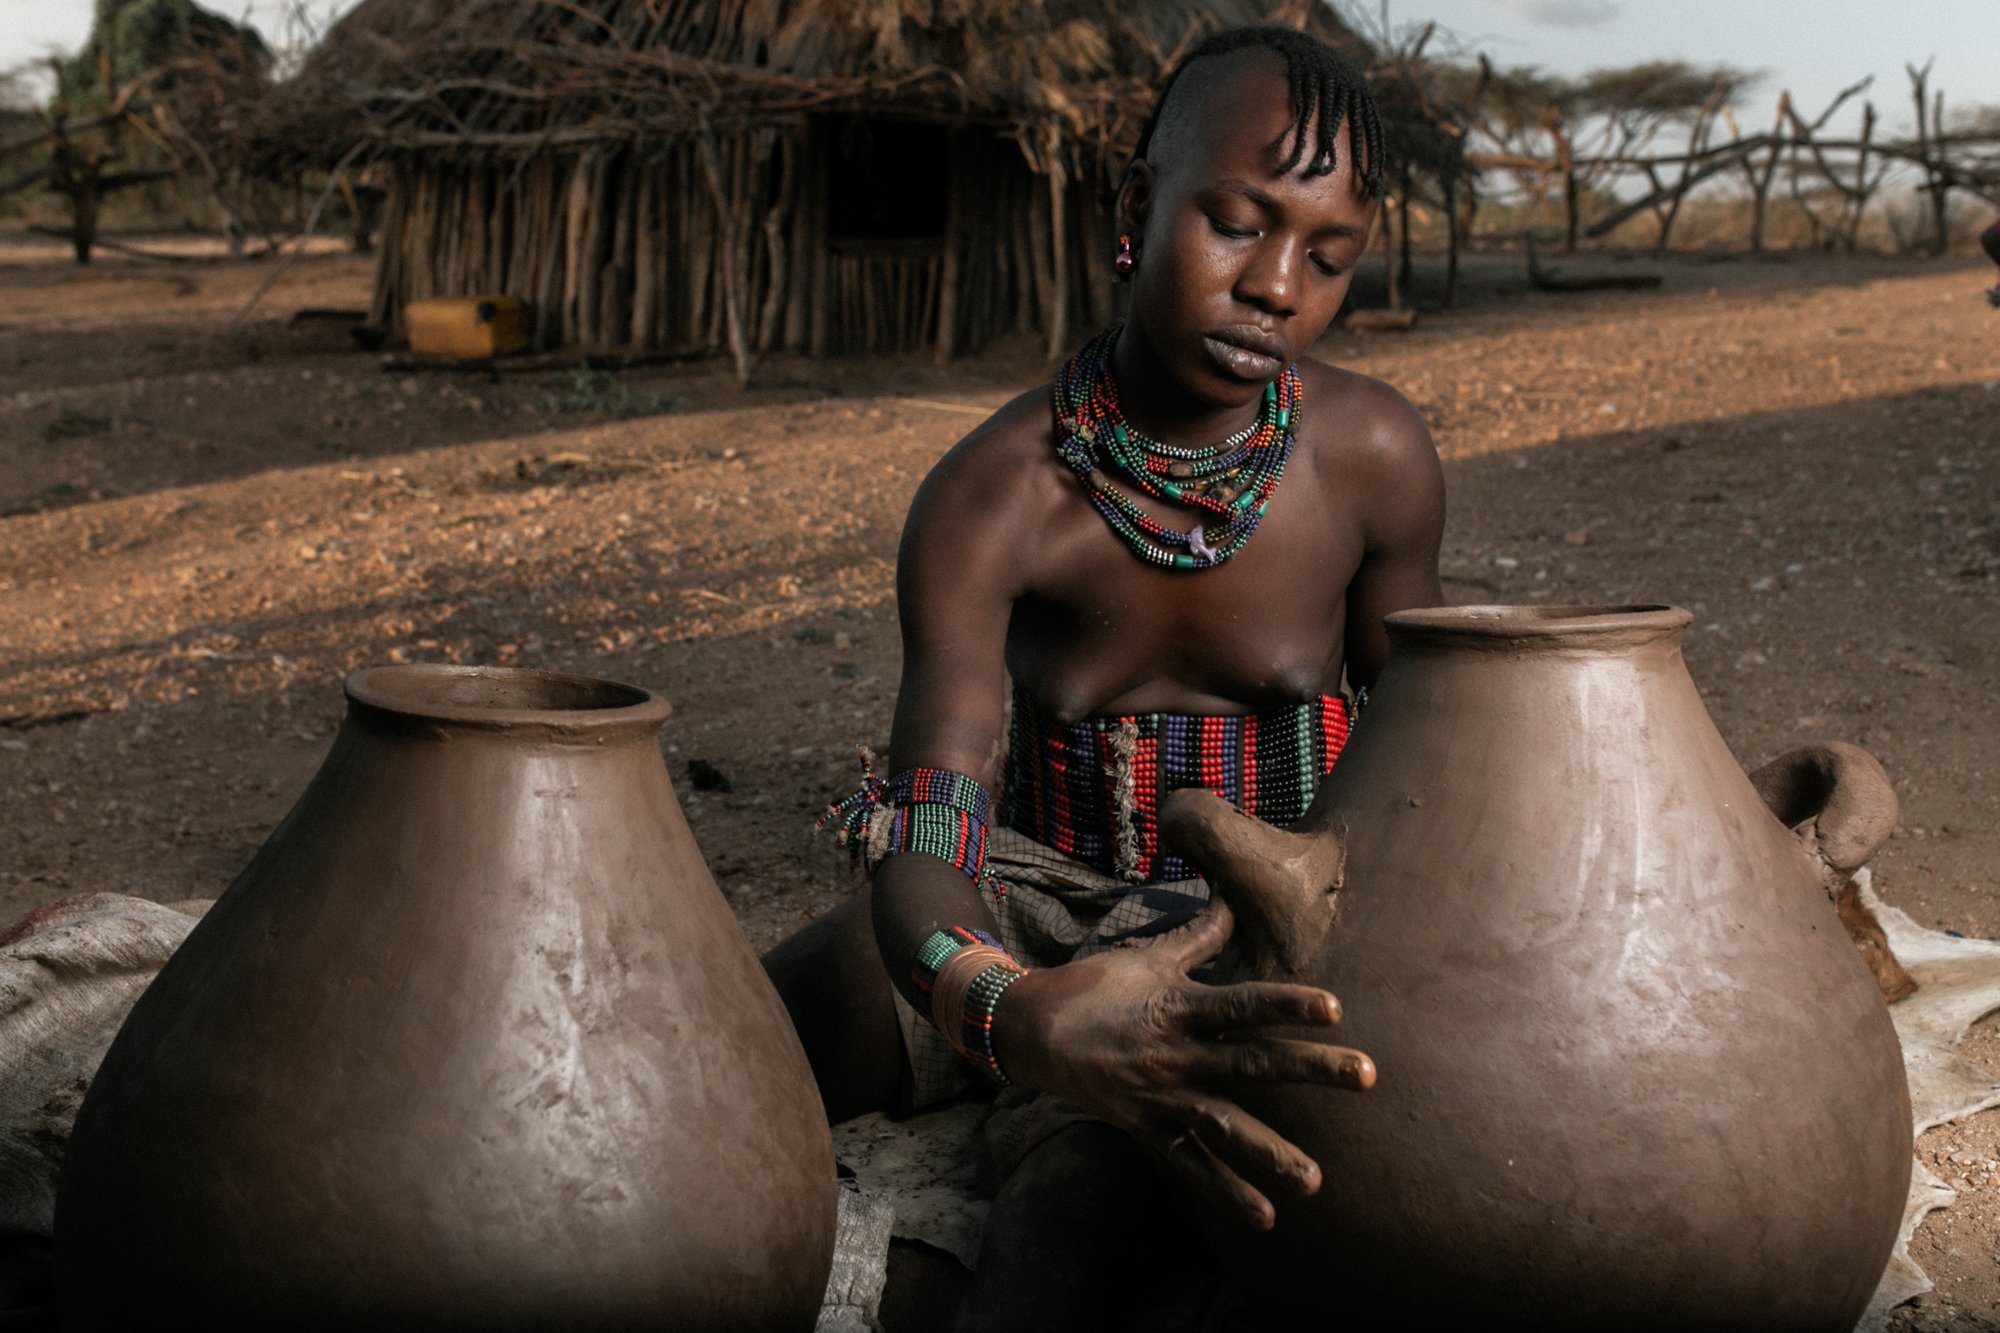 A young woman engages in the ancestral task of crafting clay pots in Omo Valley, Ethiopia.